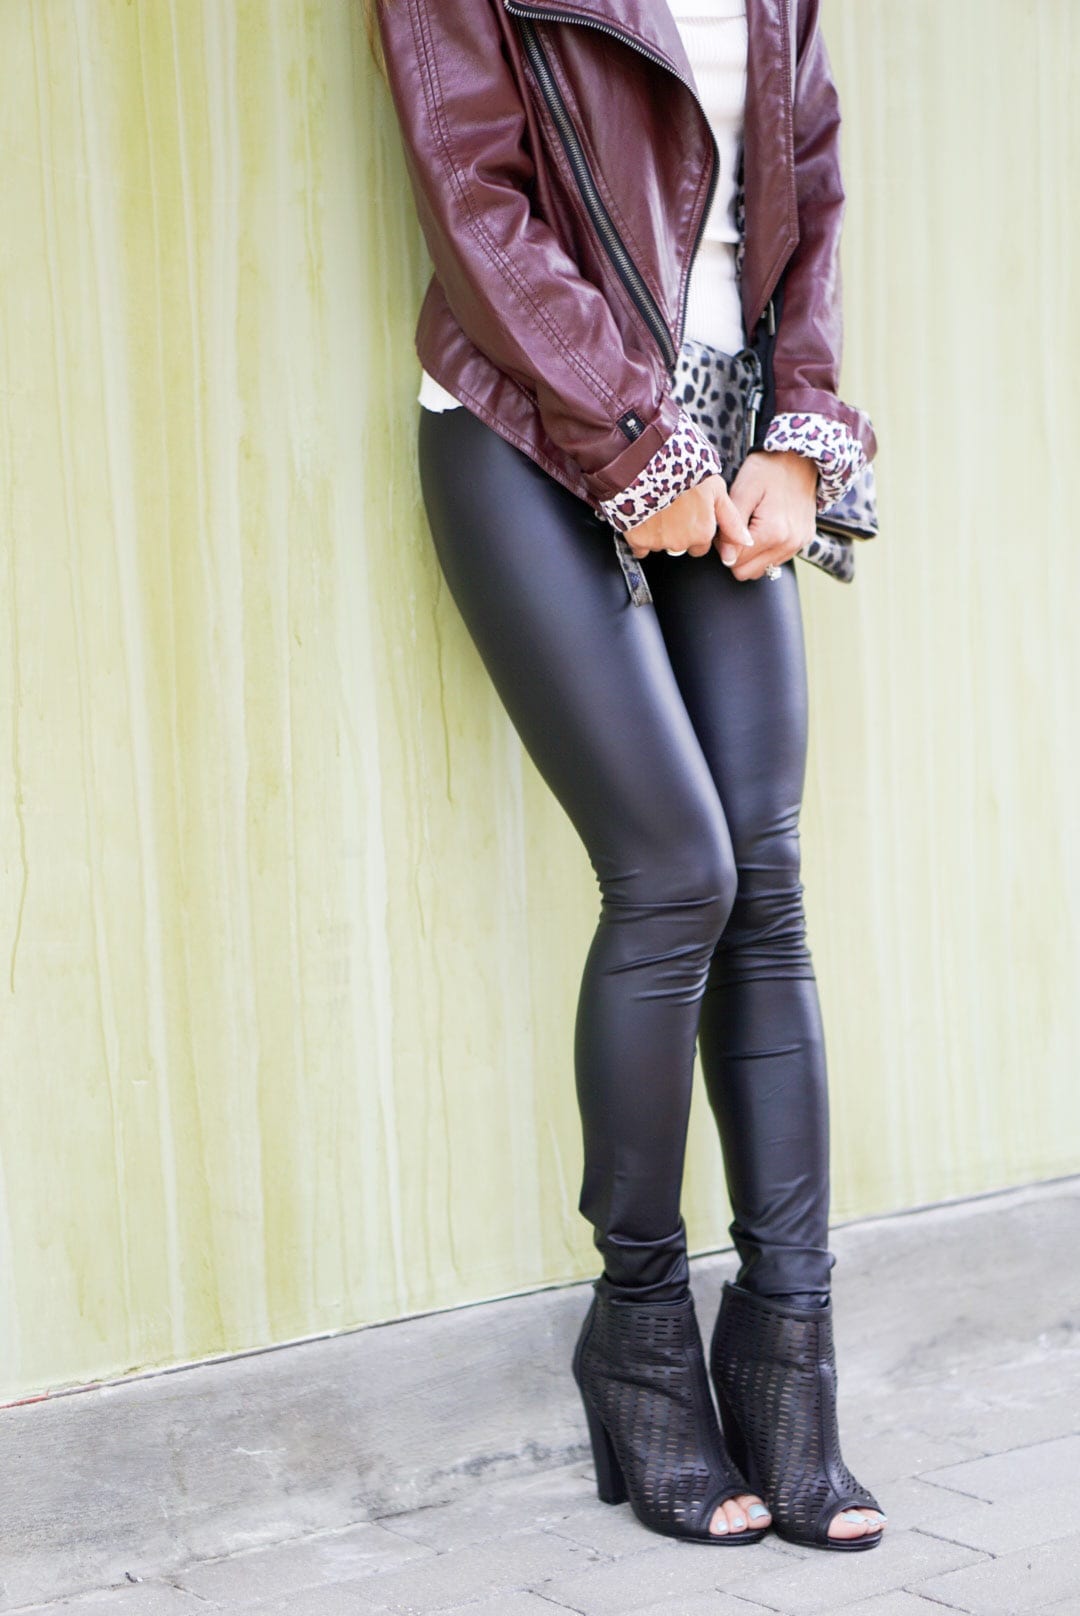 Leather and Leopard - Dawn P. Darnell